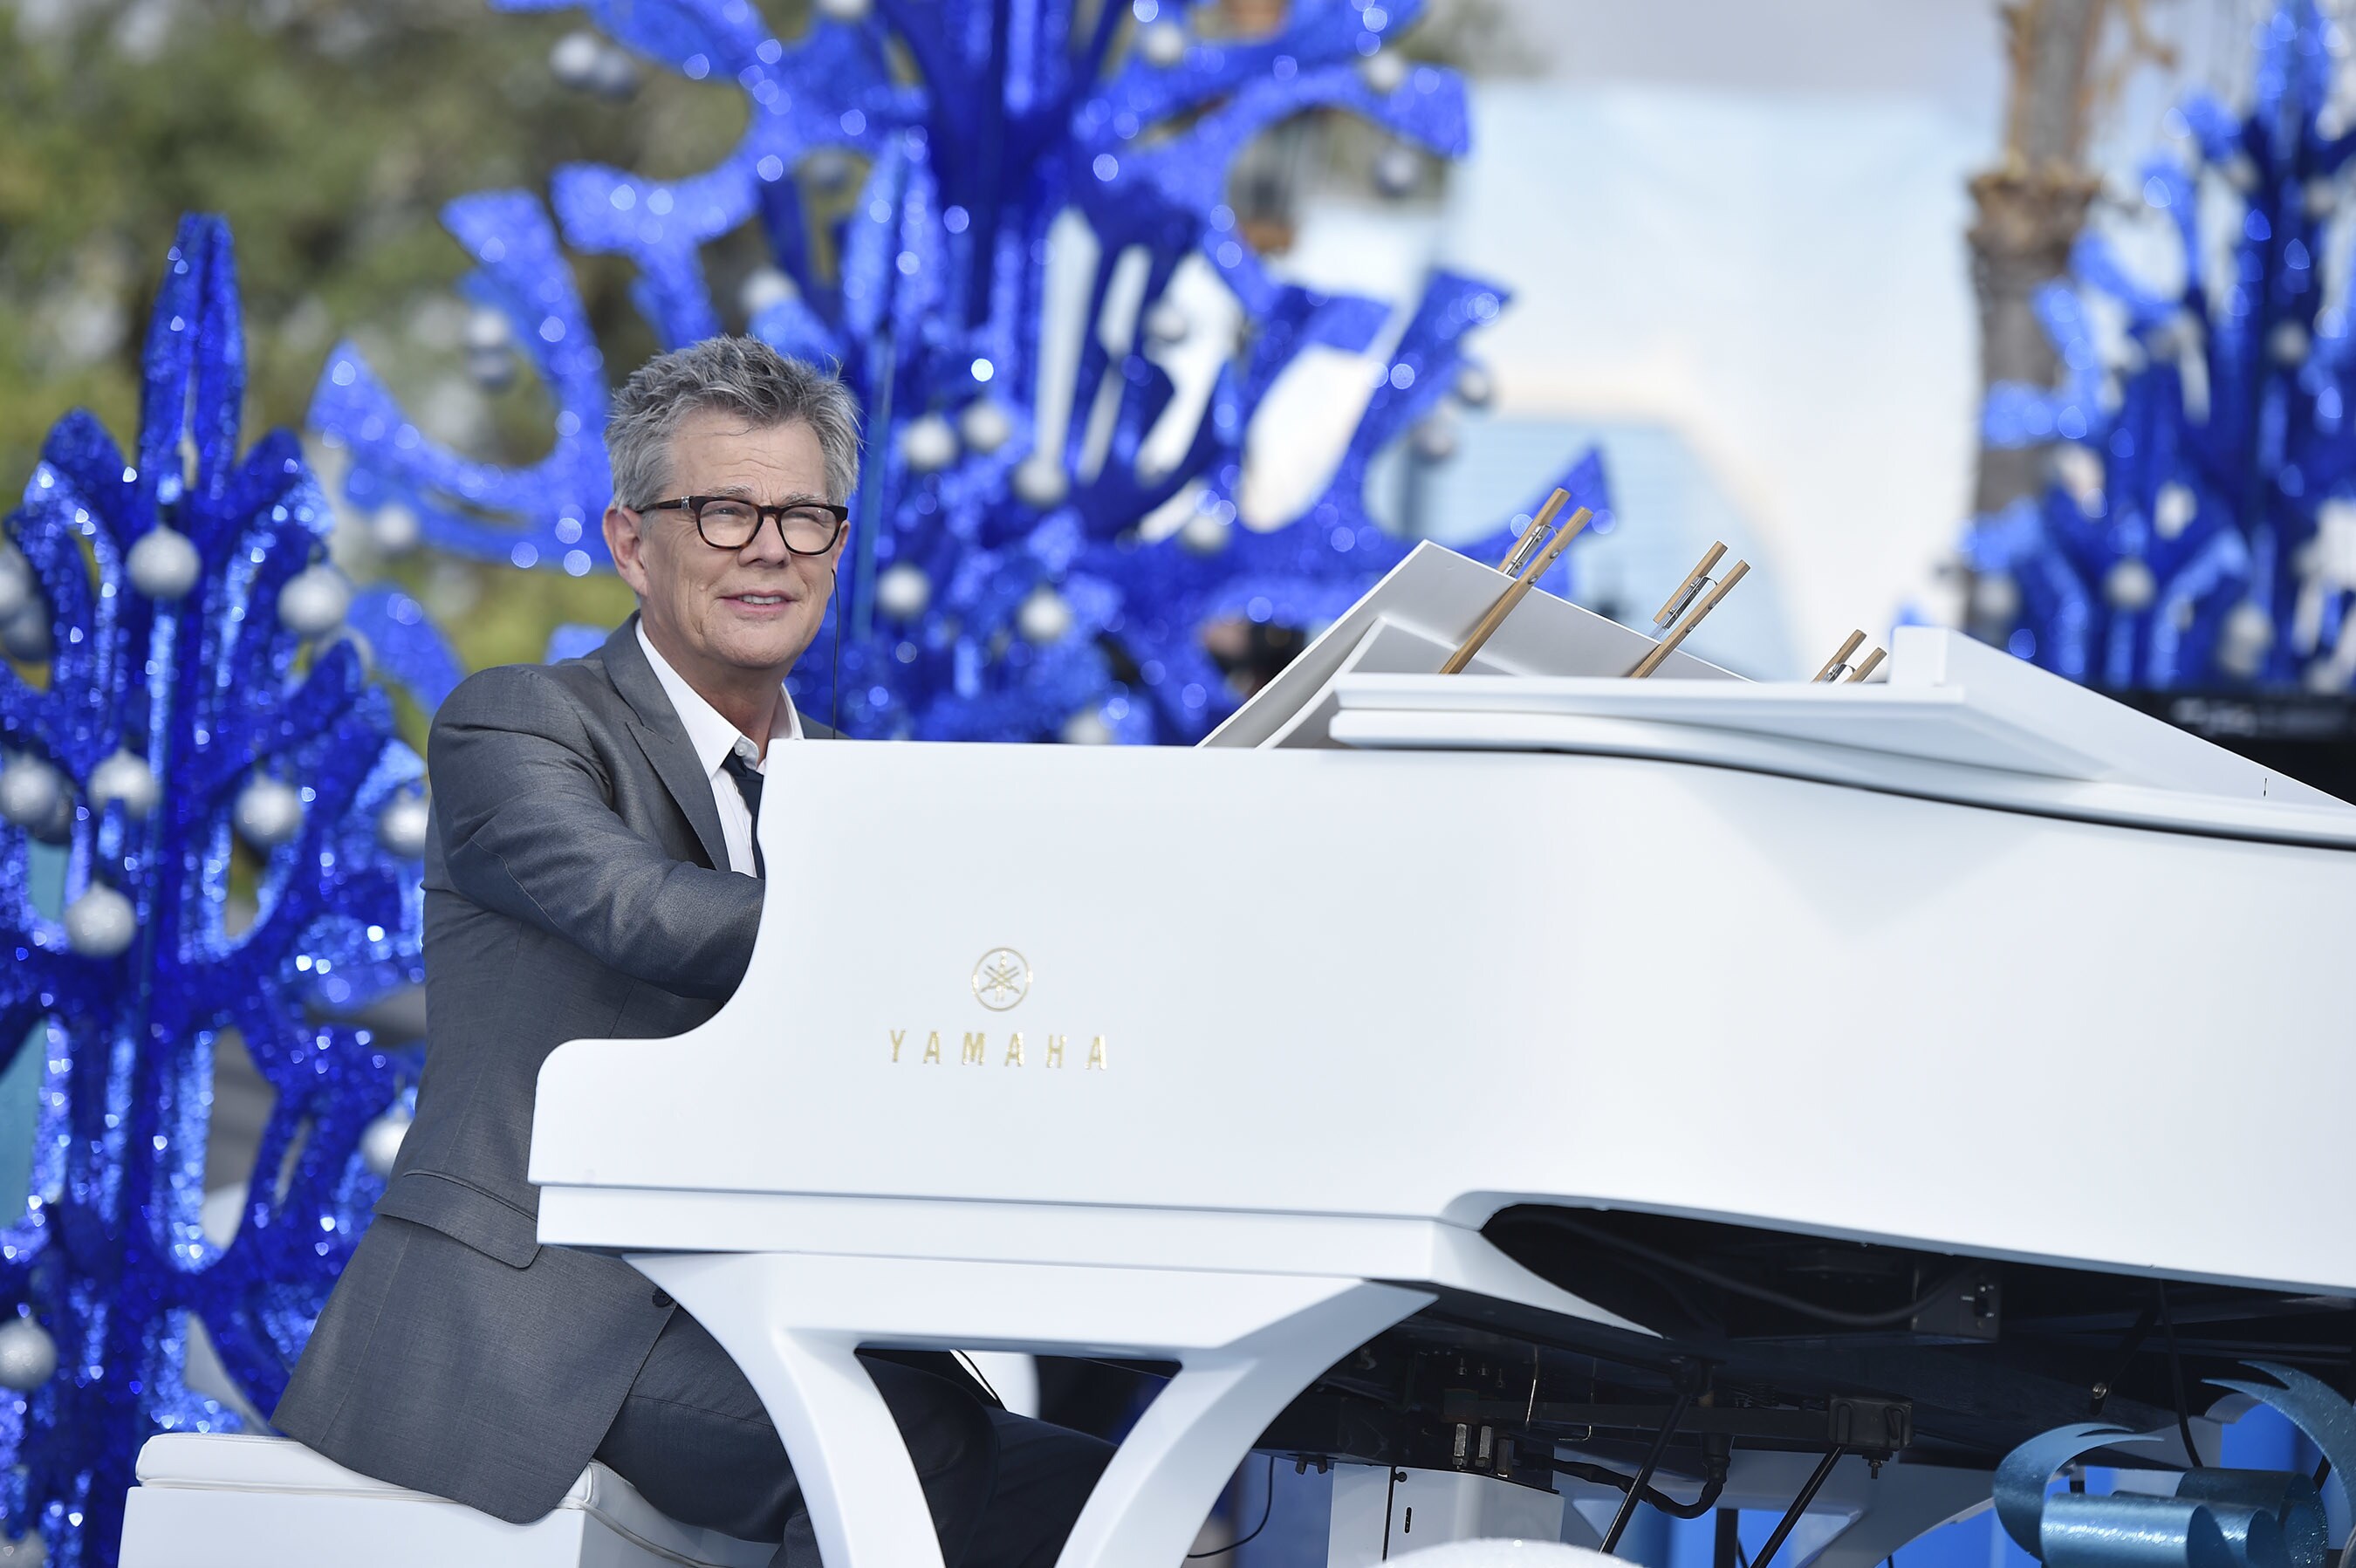 David Foster performs Nov. 11, 2015 during the taping of the 'Disney Parks Unforgettable Christma...